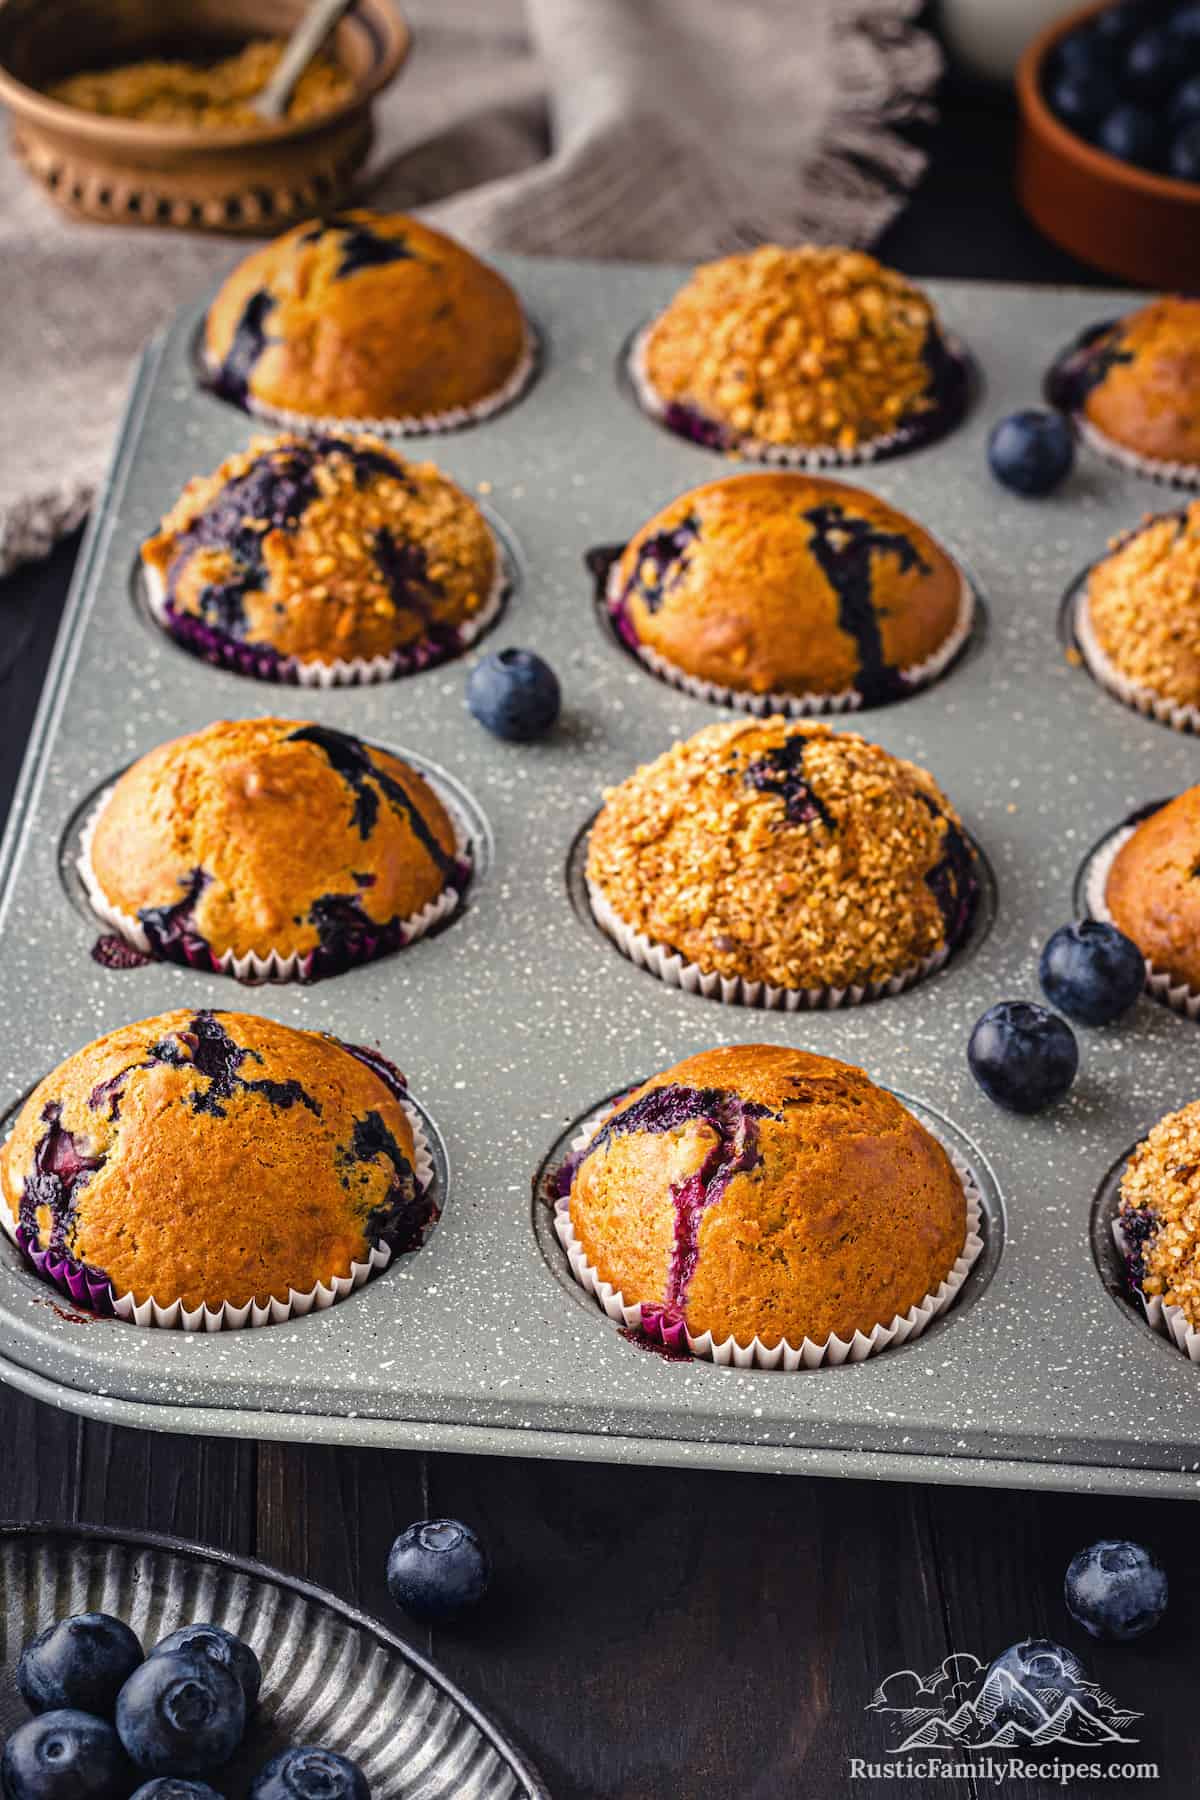 Blueberry muffins baked in a muffin tin